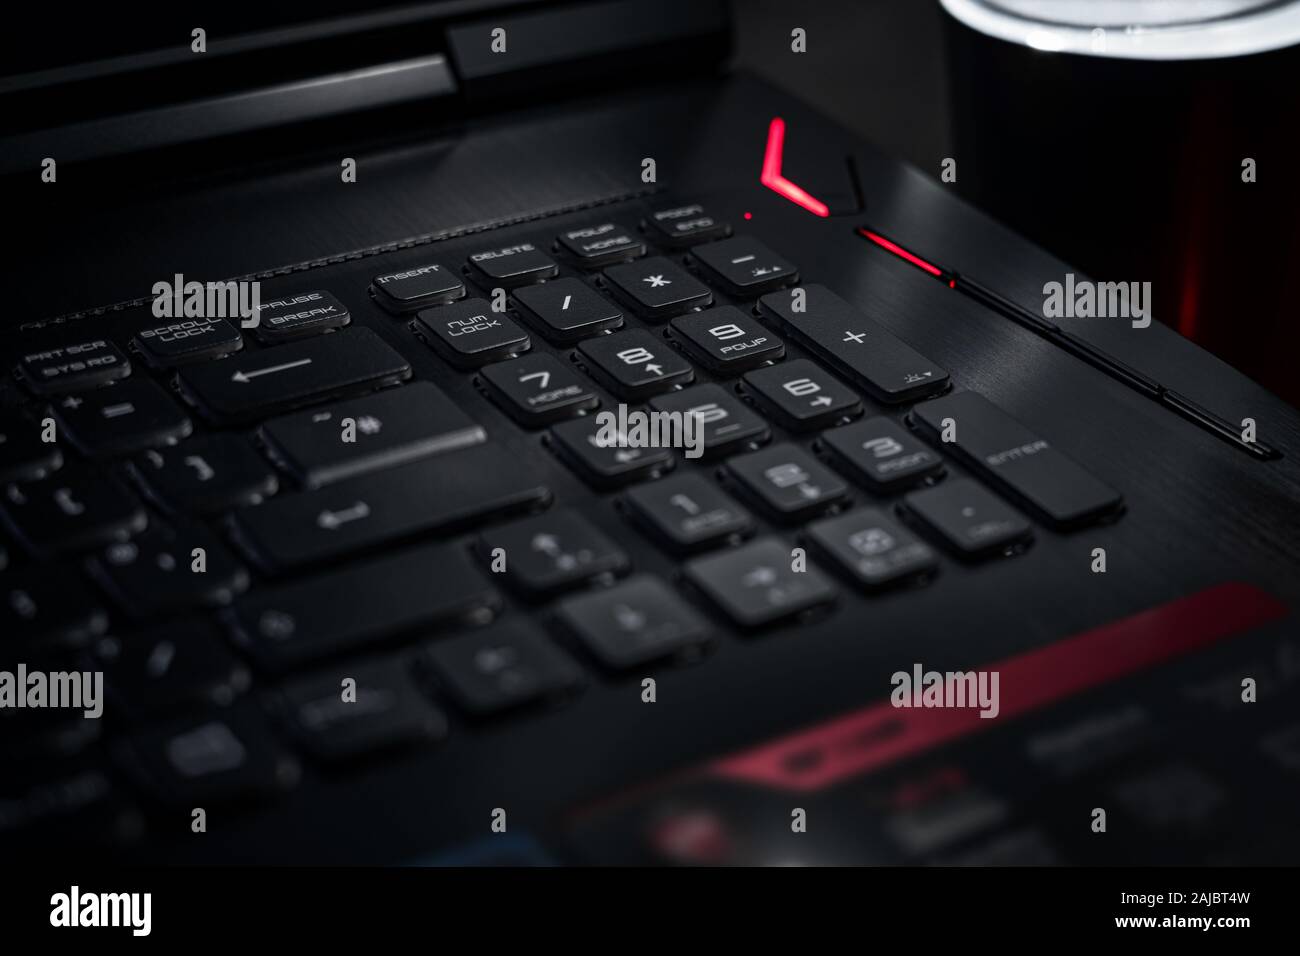 Close up of black keyboard with numpad or numeric keypad of modern laptop. Stock Photo